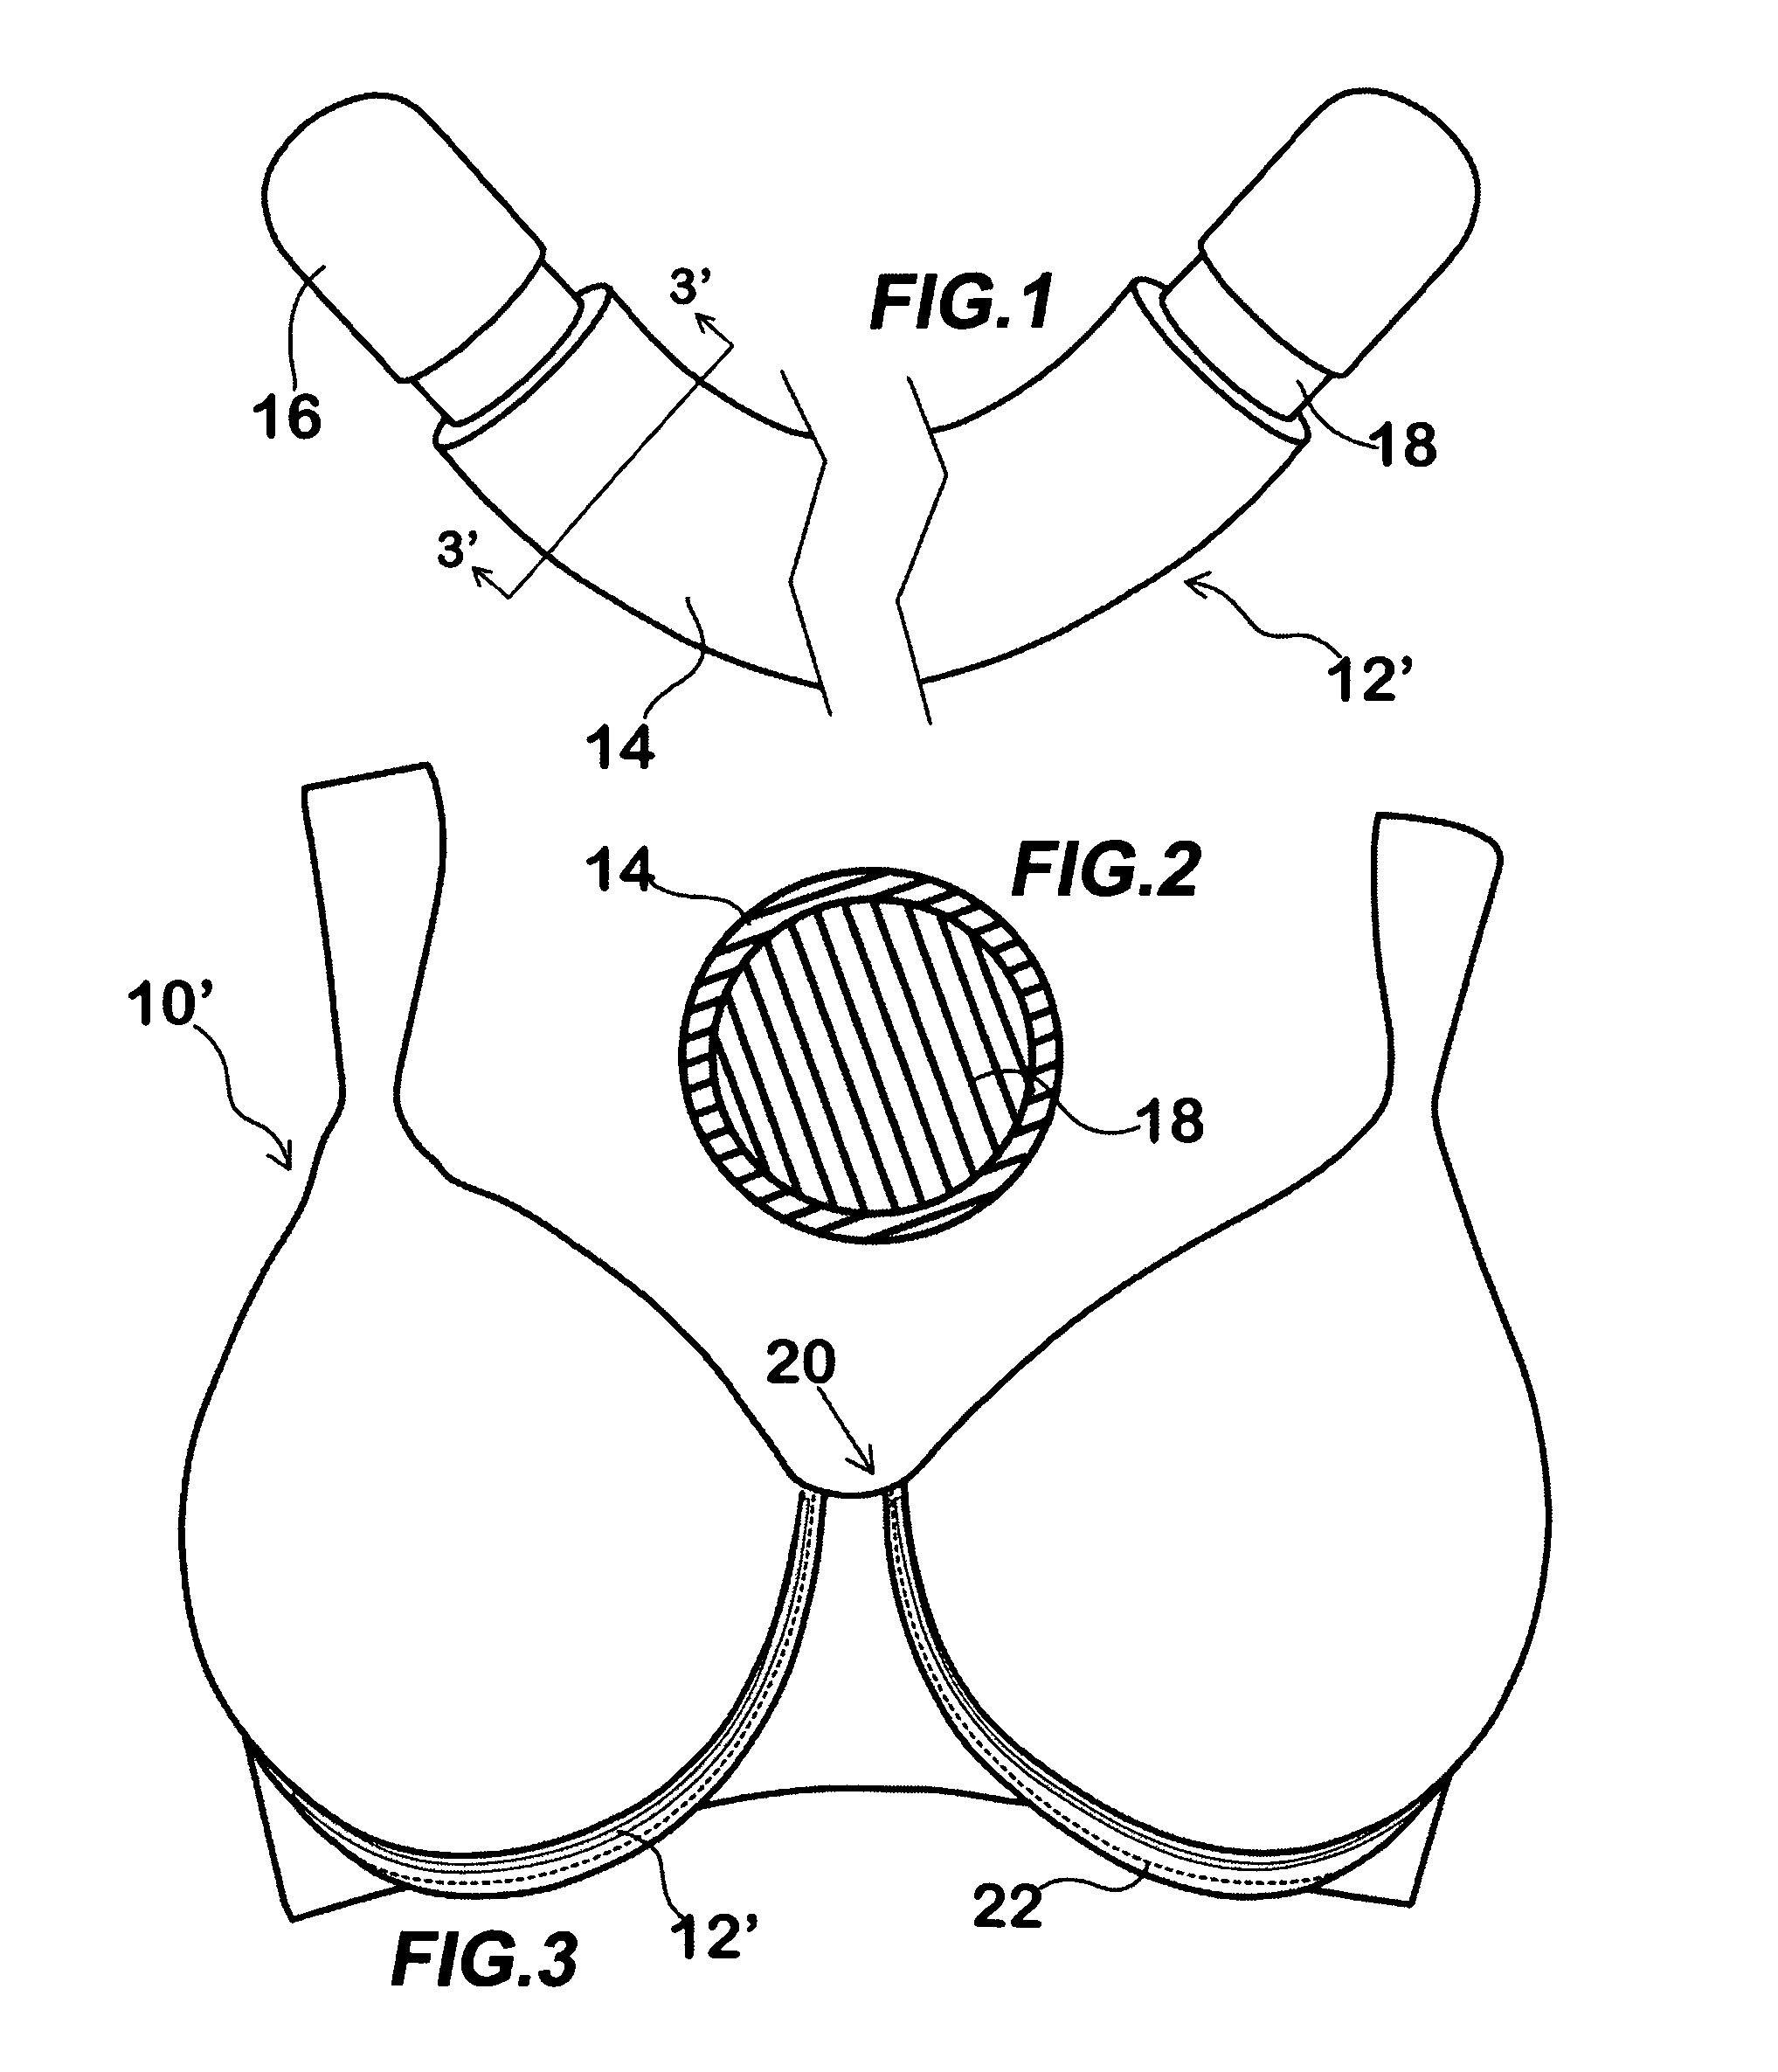 System for adjusting the fit of a bra to a wearer's bosom